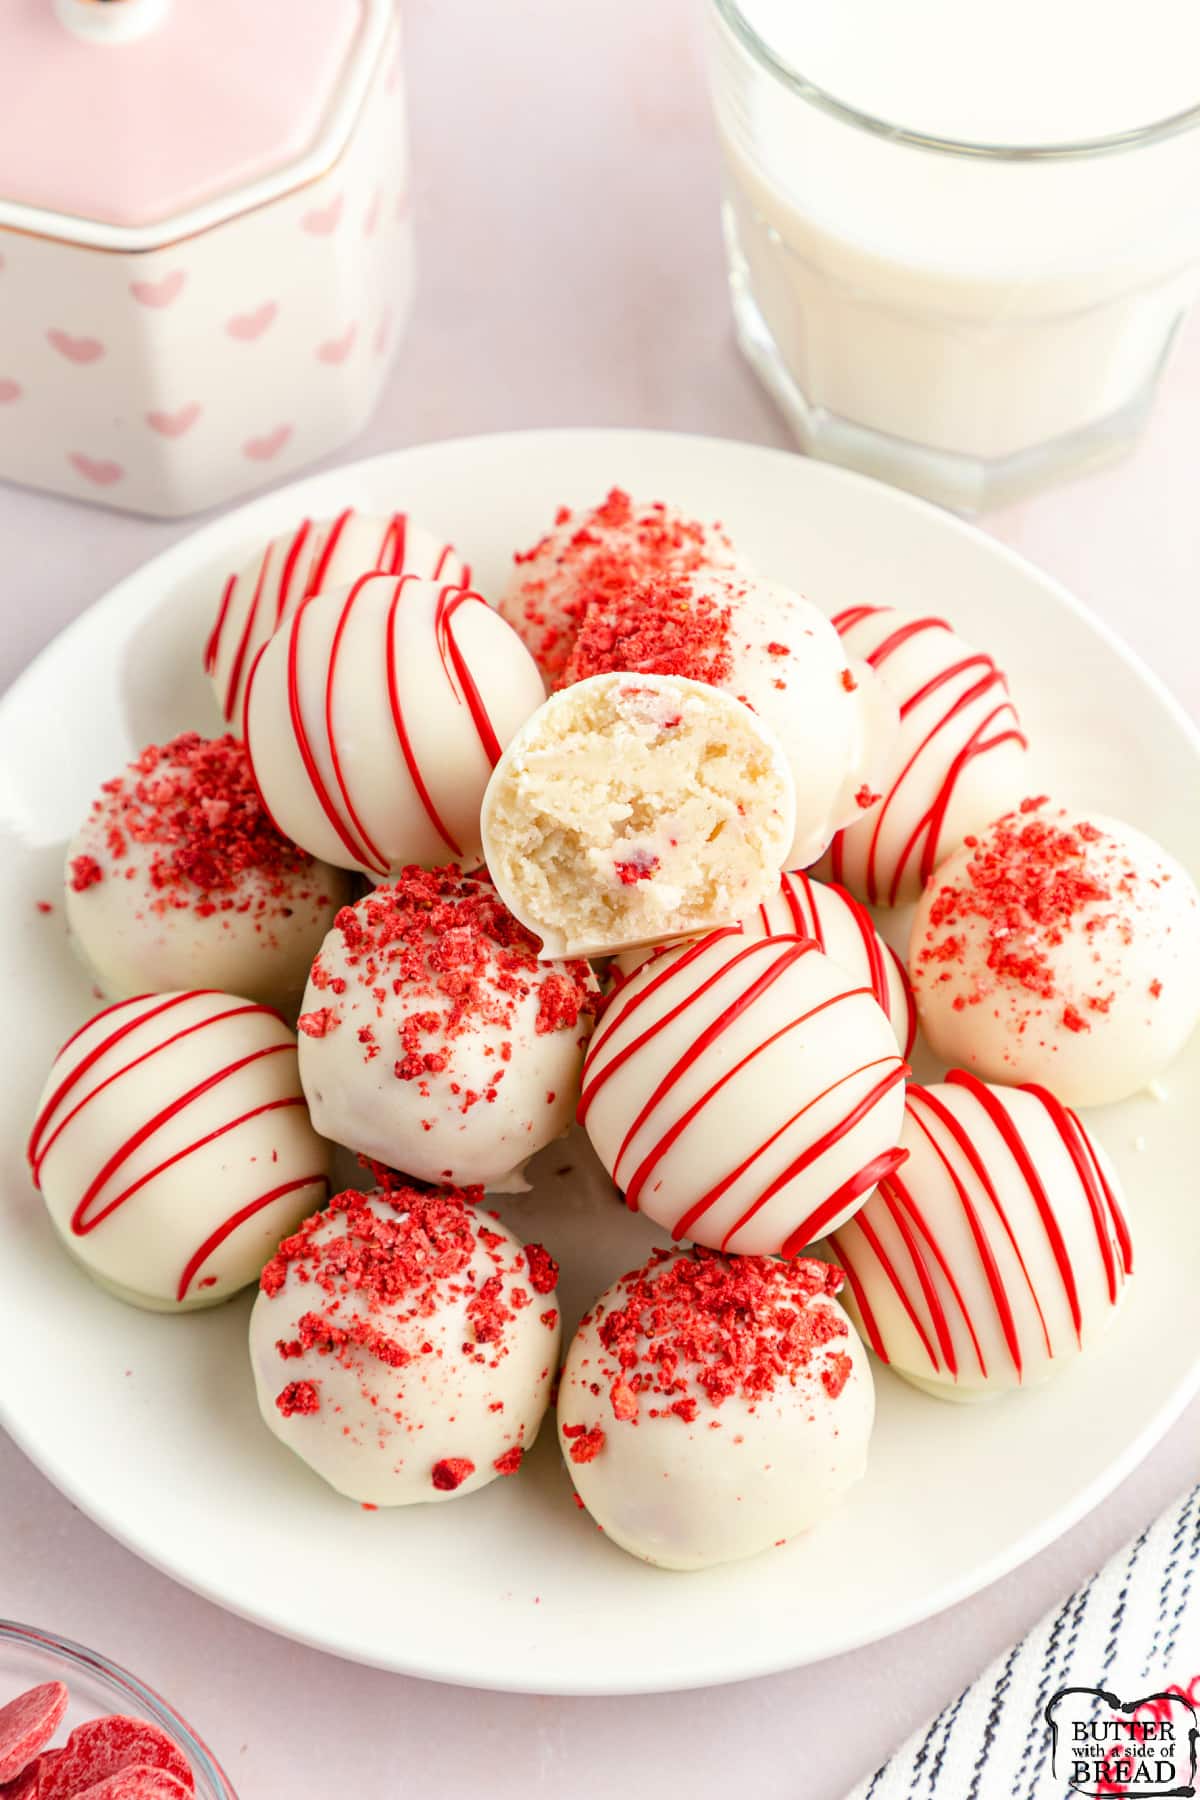 Strawberry Cake Mix Cake Balls made with a vanilla cake mix, cream cheese and freeze dried strawberries. Dip the cake balls in melted chocolate and add some sprinkles. Simple no bake dessert that is perfect for parties and holidays!